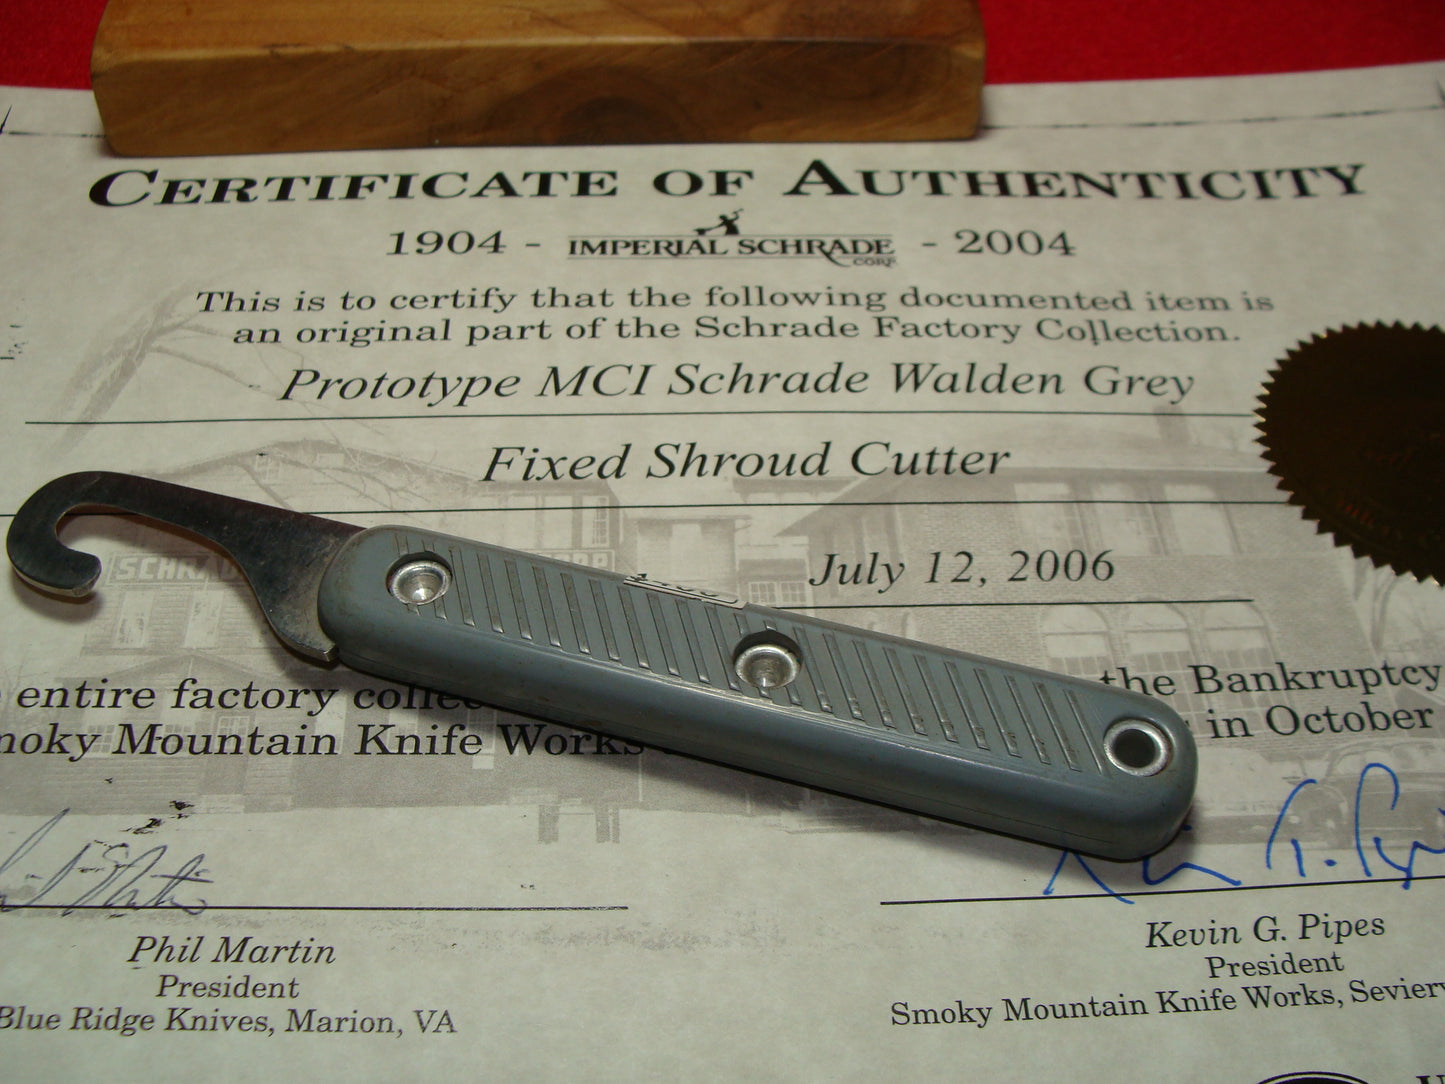 SCHRADE WALDEN NY 1946-76 PROTOTYPE MC1 GREY FIXED SHROUD CUTTER NON AUTOMATIC KNIFE PART OF THE SCHRADE FACTORY COLLECTION